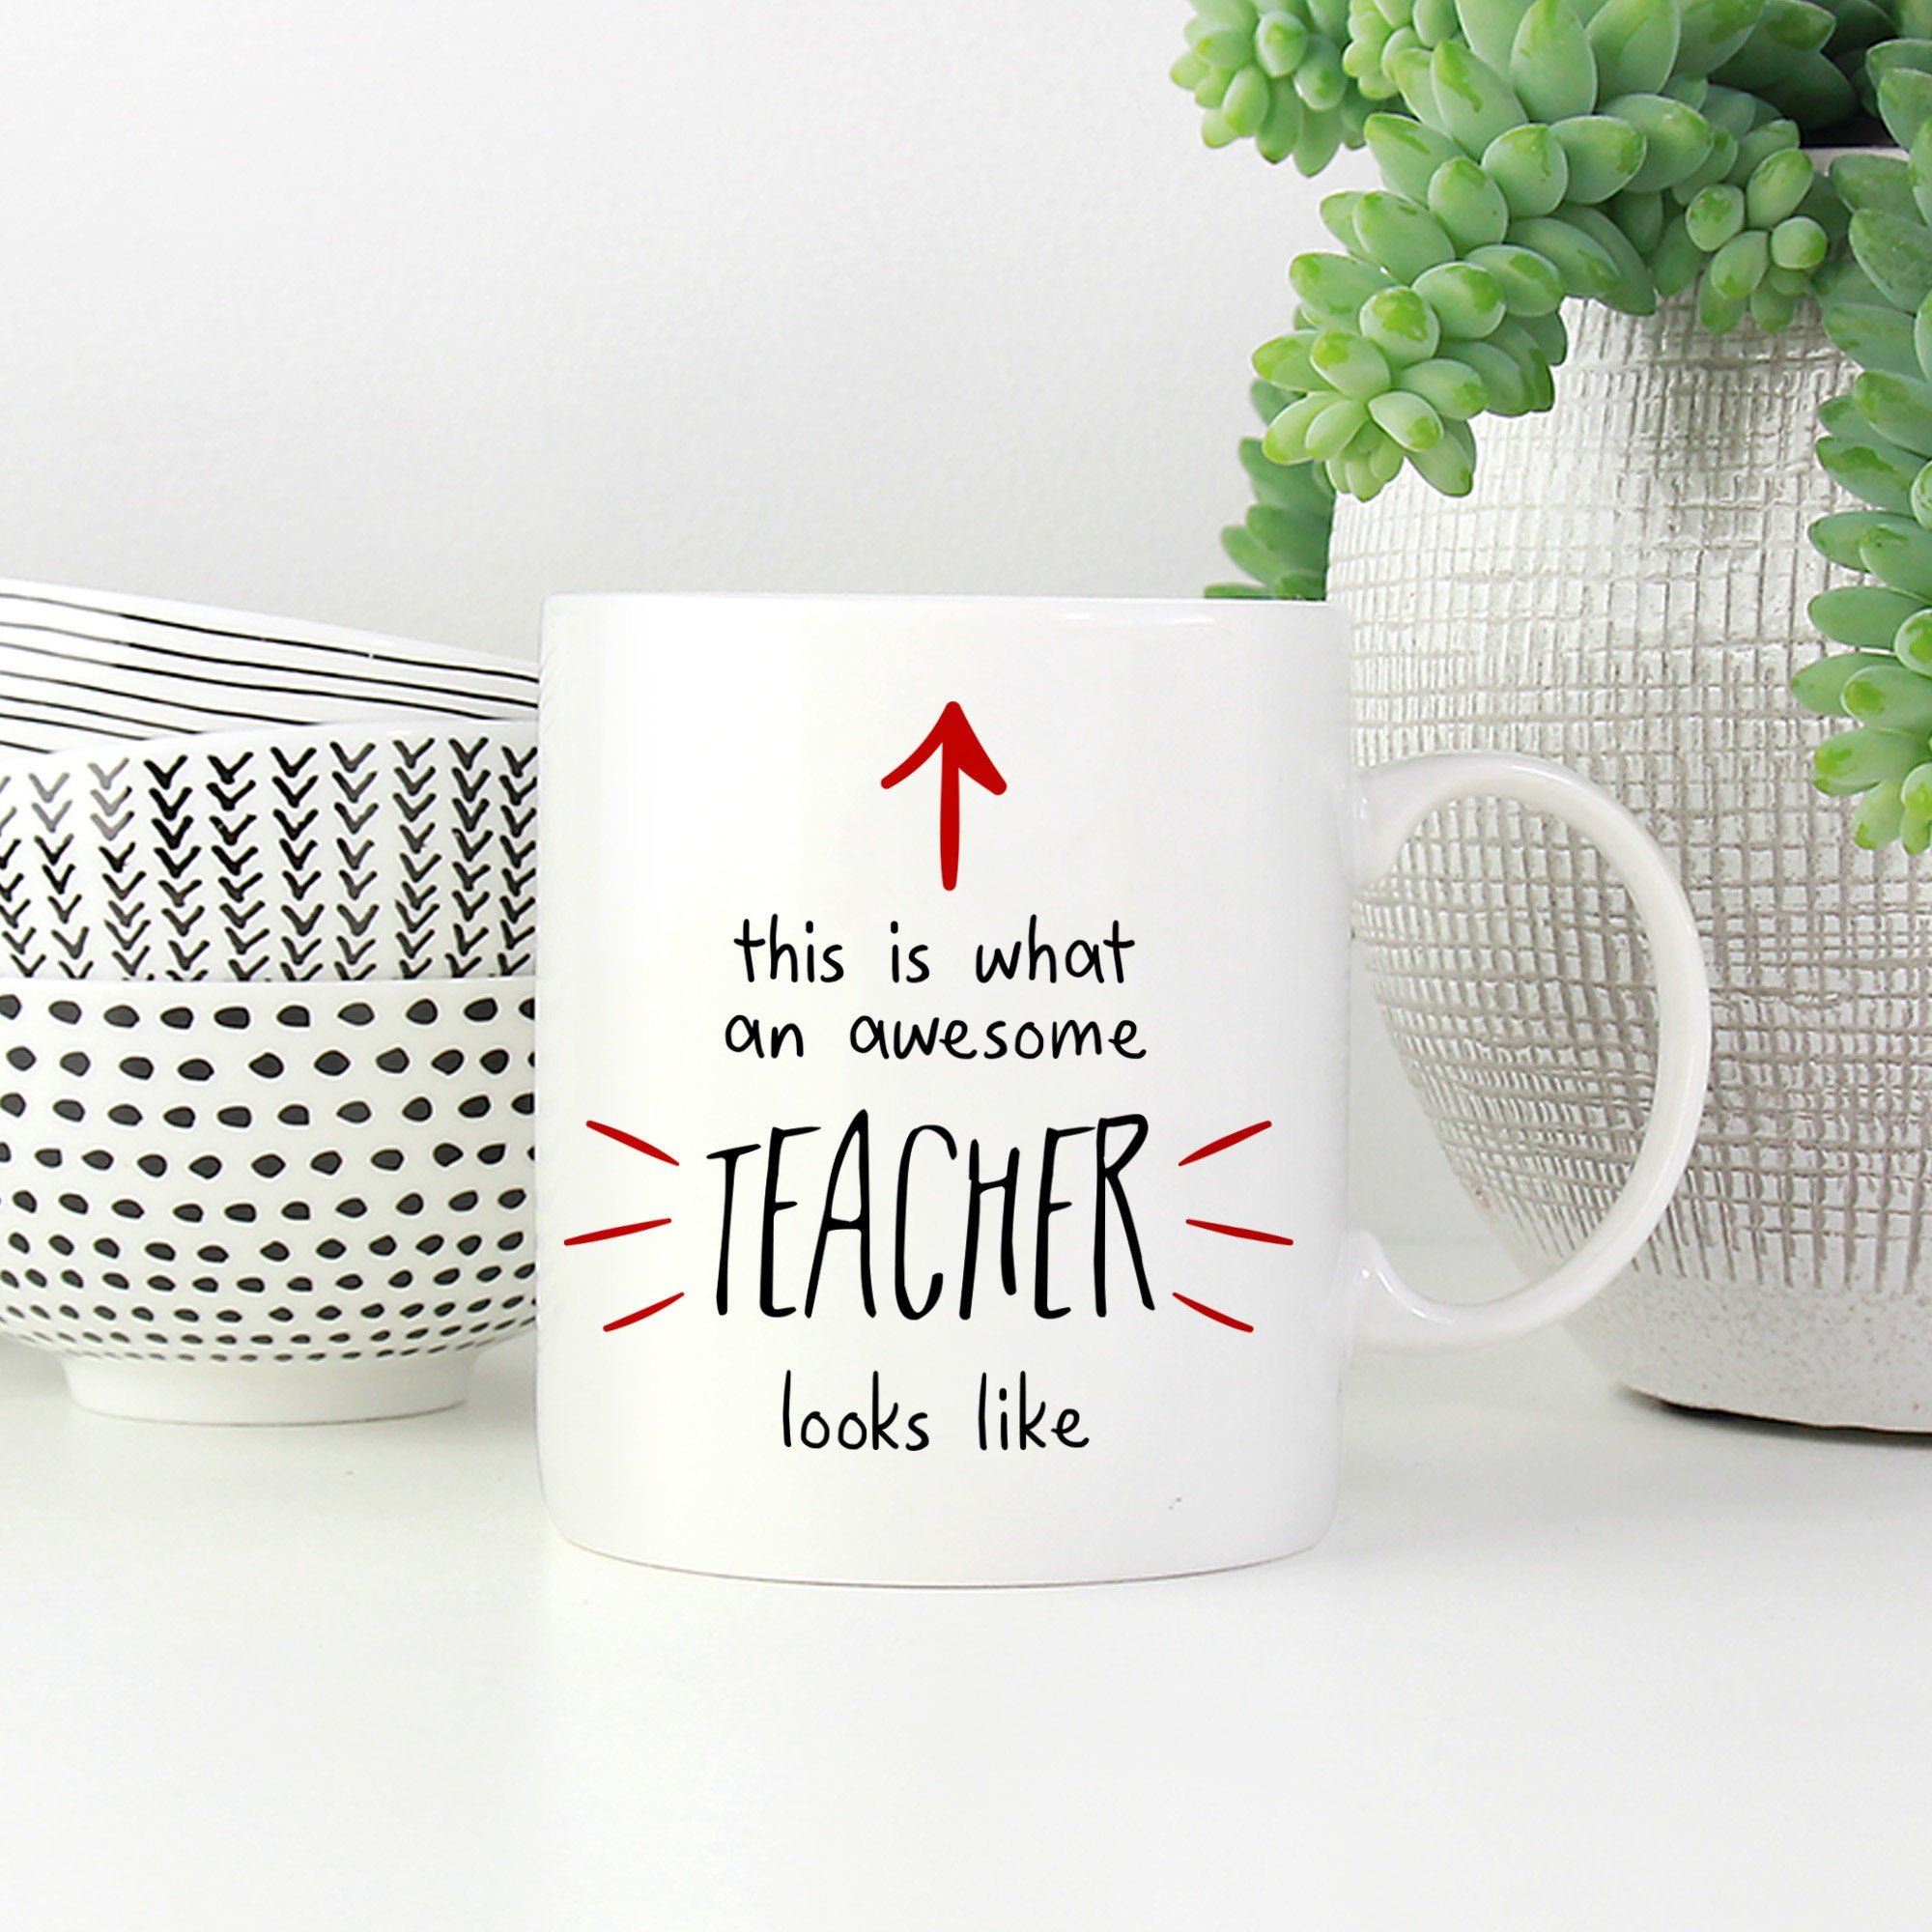 This is an awesome teacher looks like mug, Teacher thank you gift, End of term gift